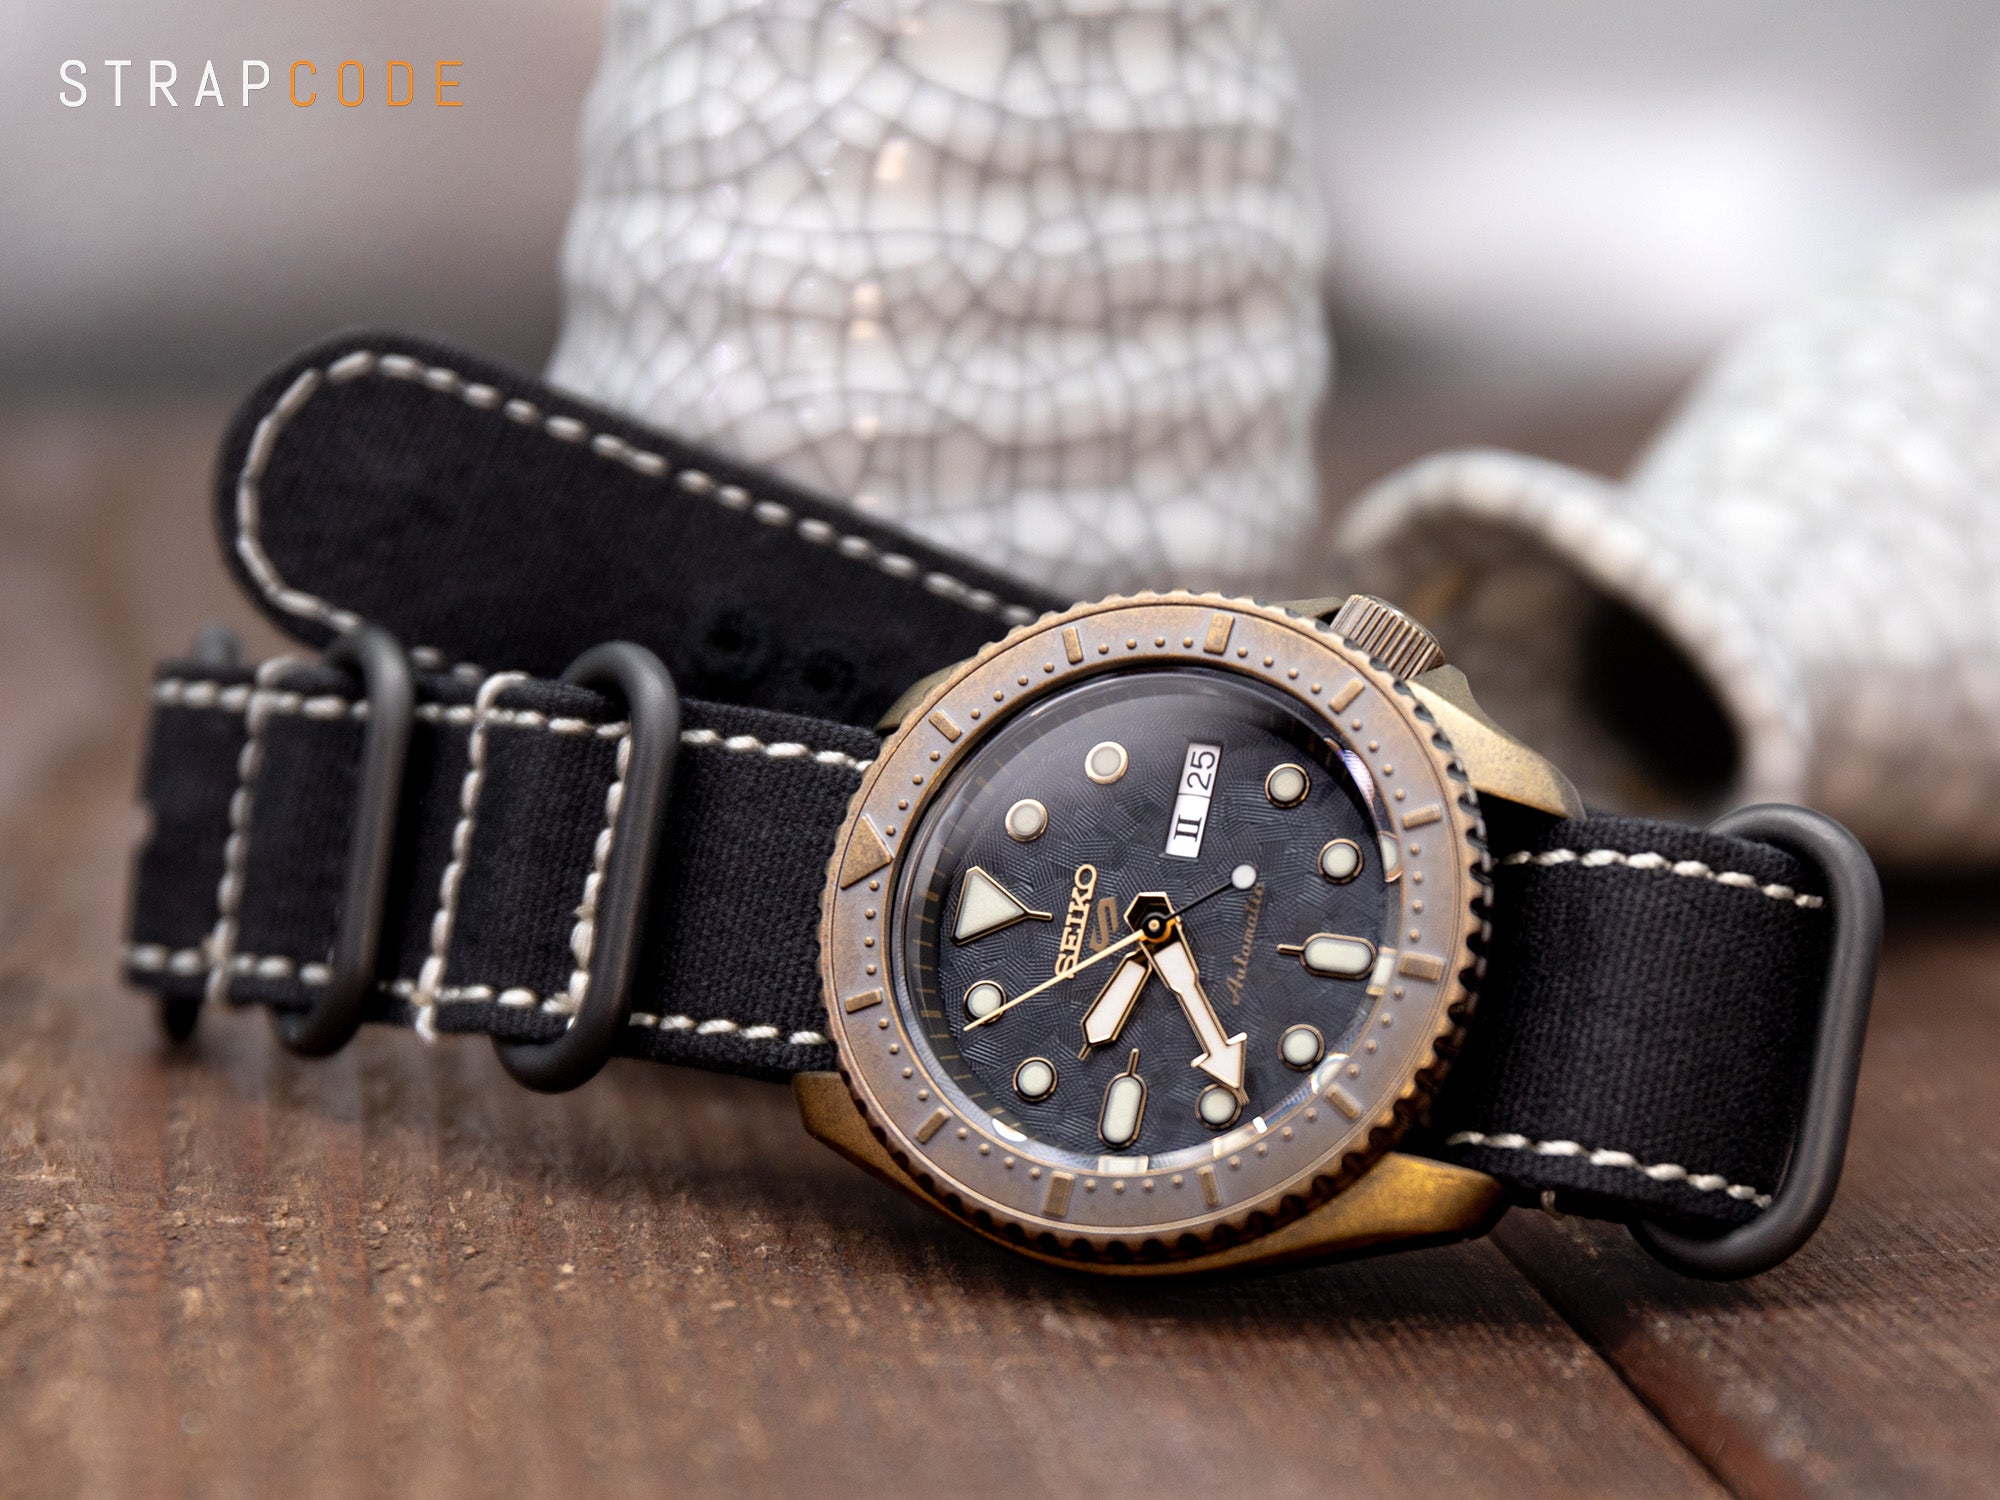 Washed Canvas Thick NATO Zulu strap on Seiko 5 Sports SRPE80 Bronze by Strapcode watch bands